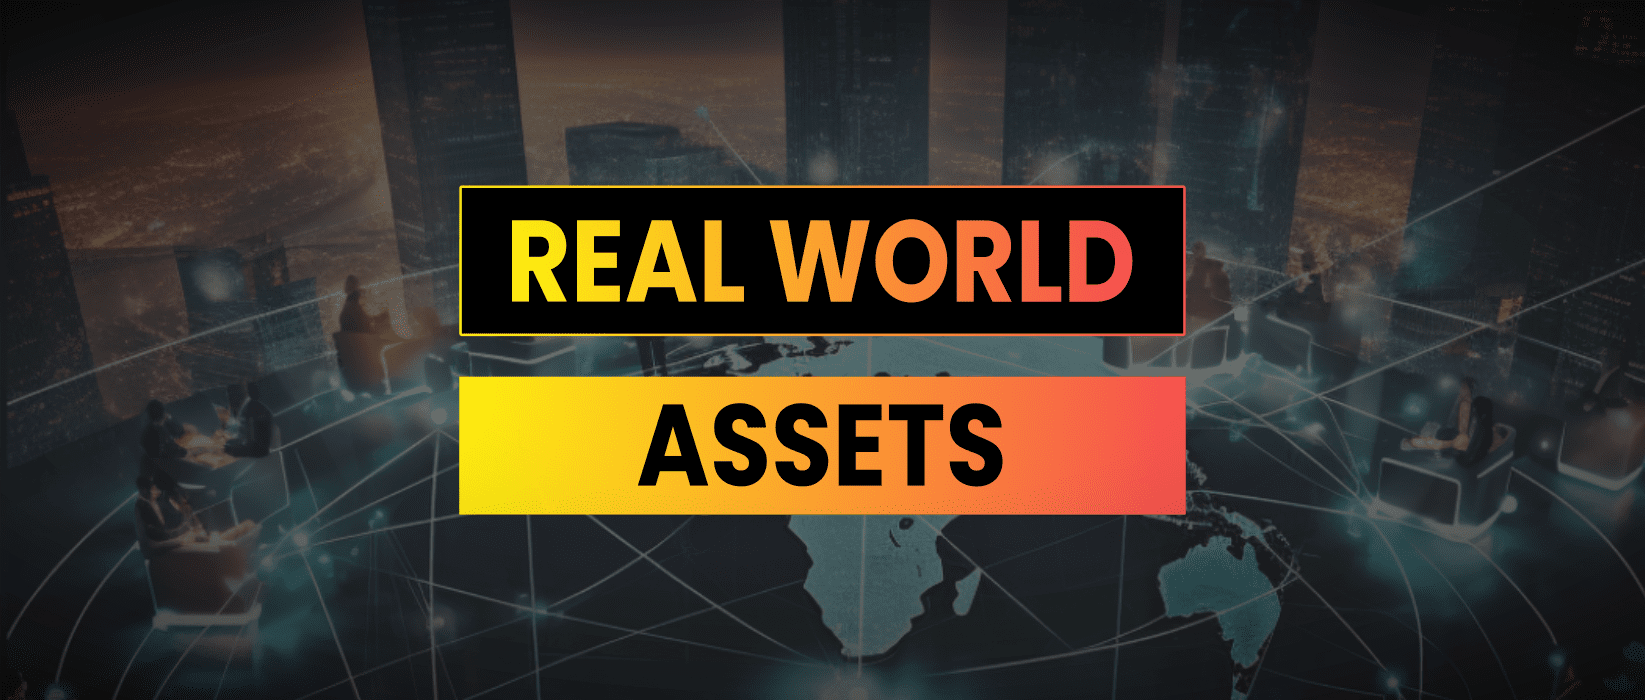 Investing In Real World Assets Through DeFi